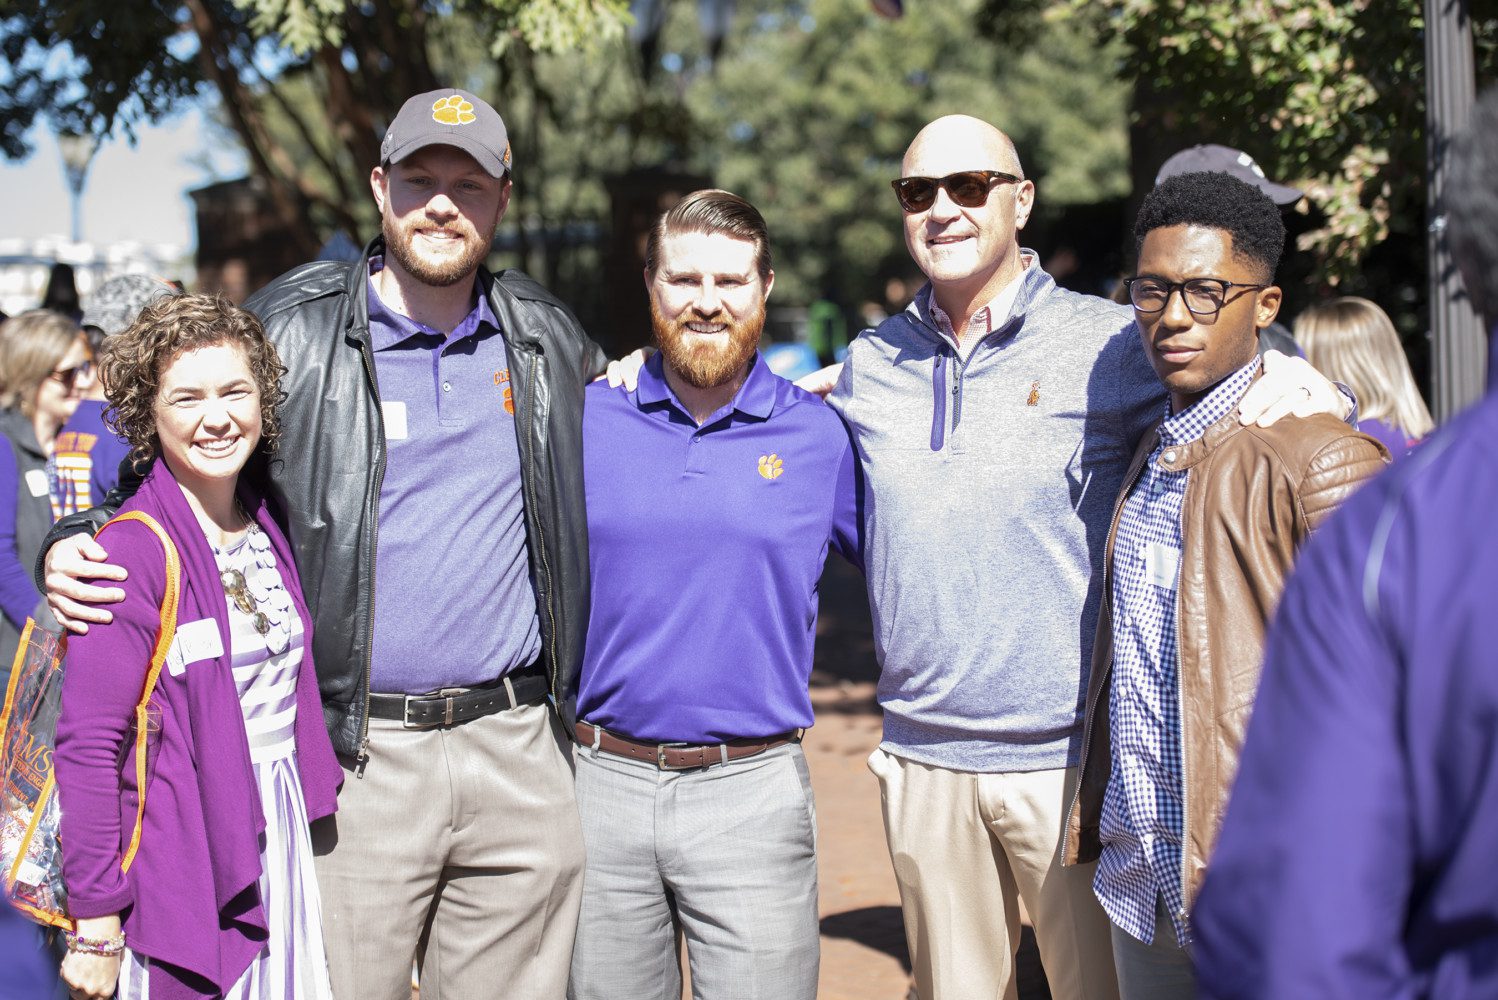 Members of Clemson's Military & Veteran Engagement with President Jim Clements and SVA President Jared Lyon at a military appreciation tailgate on Saturday, Nov. 2.